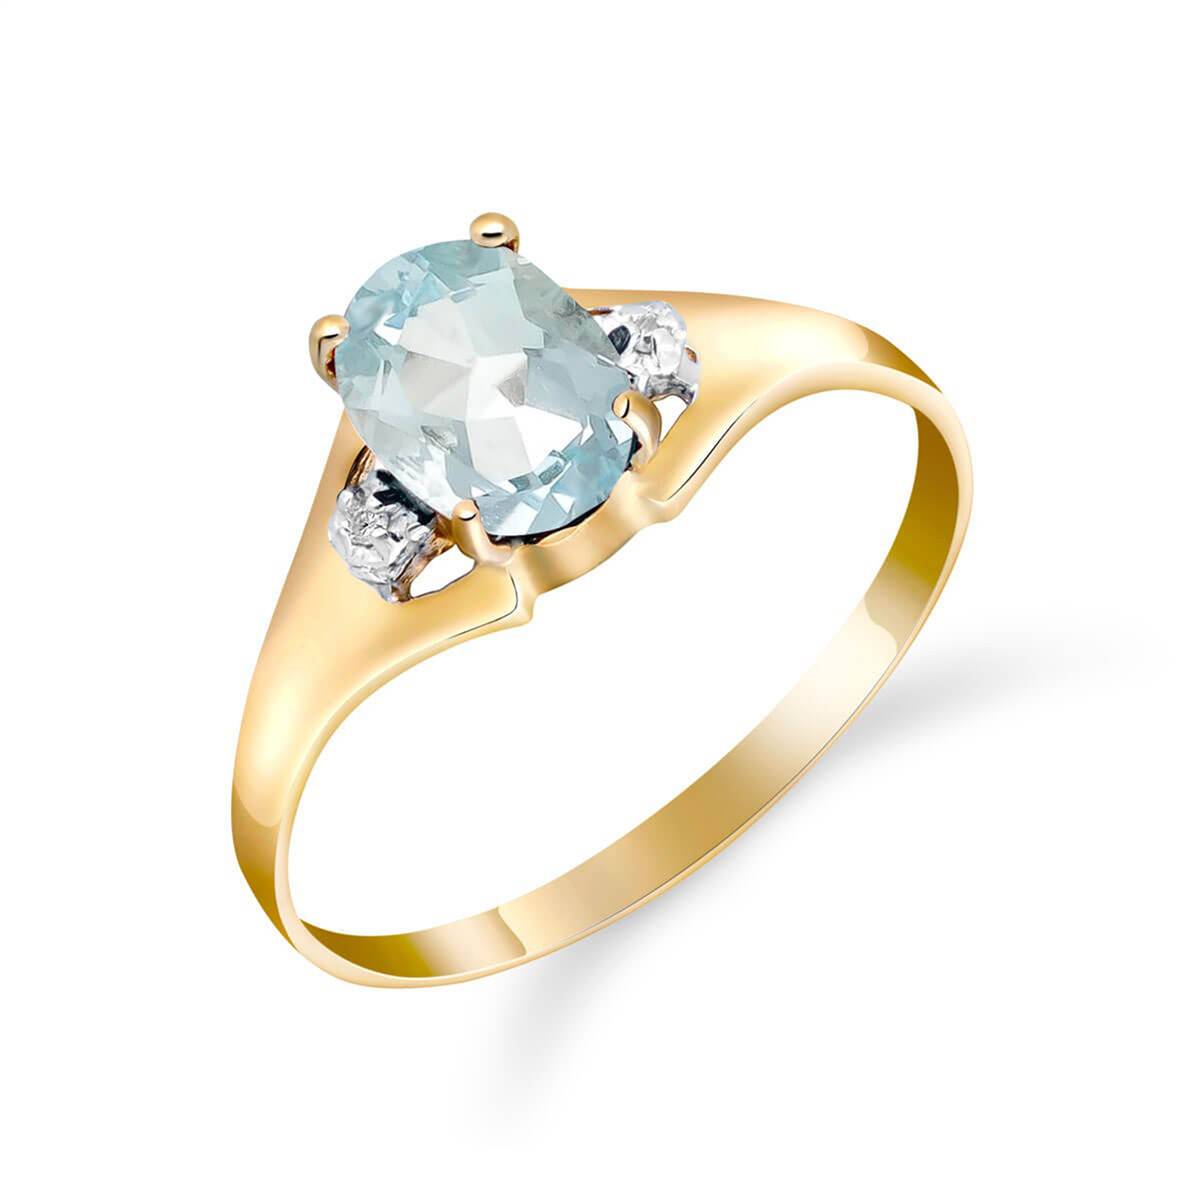 0.76 Carat 14K Solid Yellow Gold Permitted To Love Aquamarine Diamond Ring